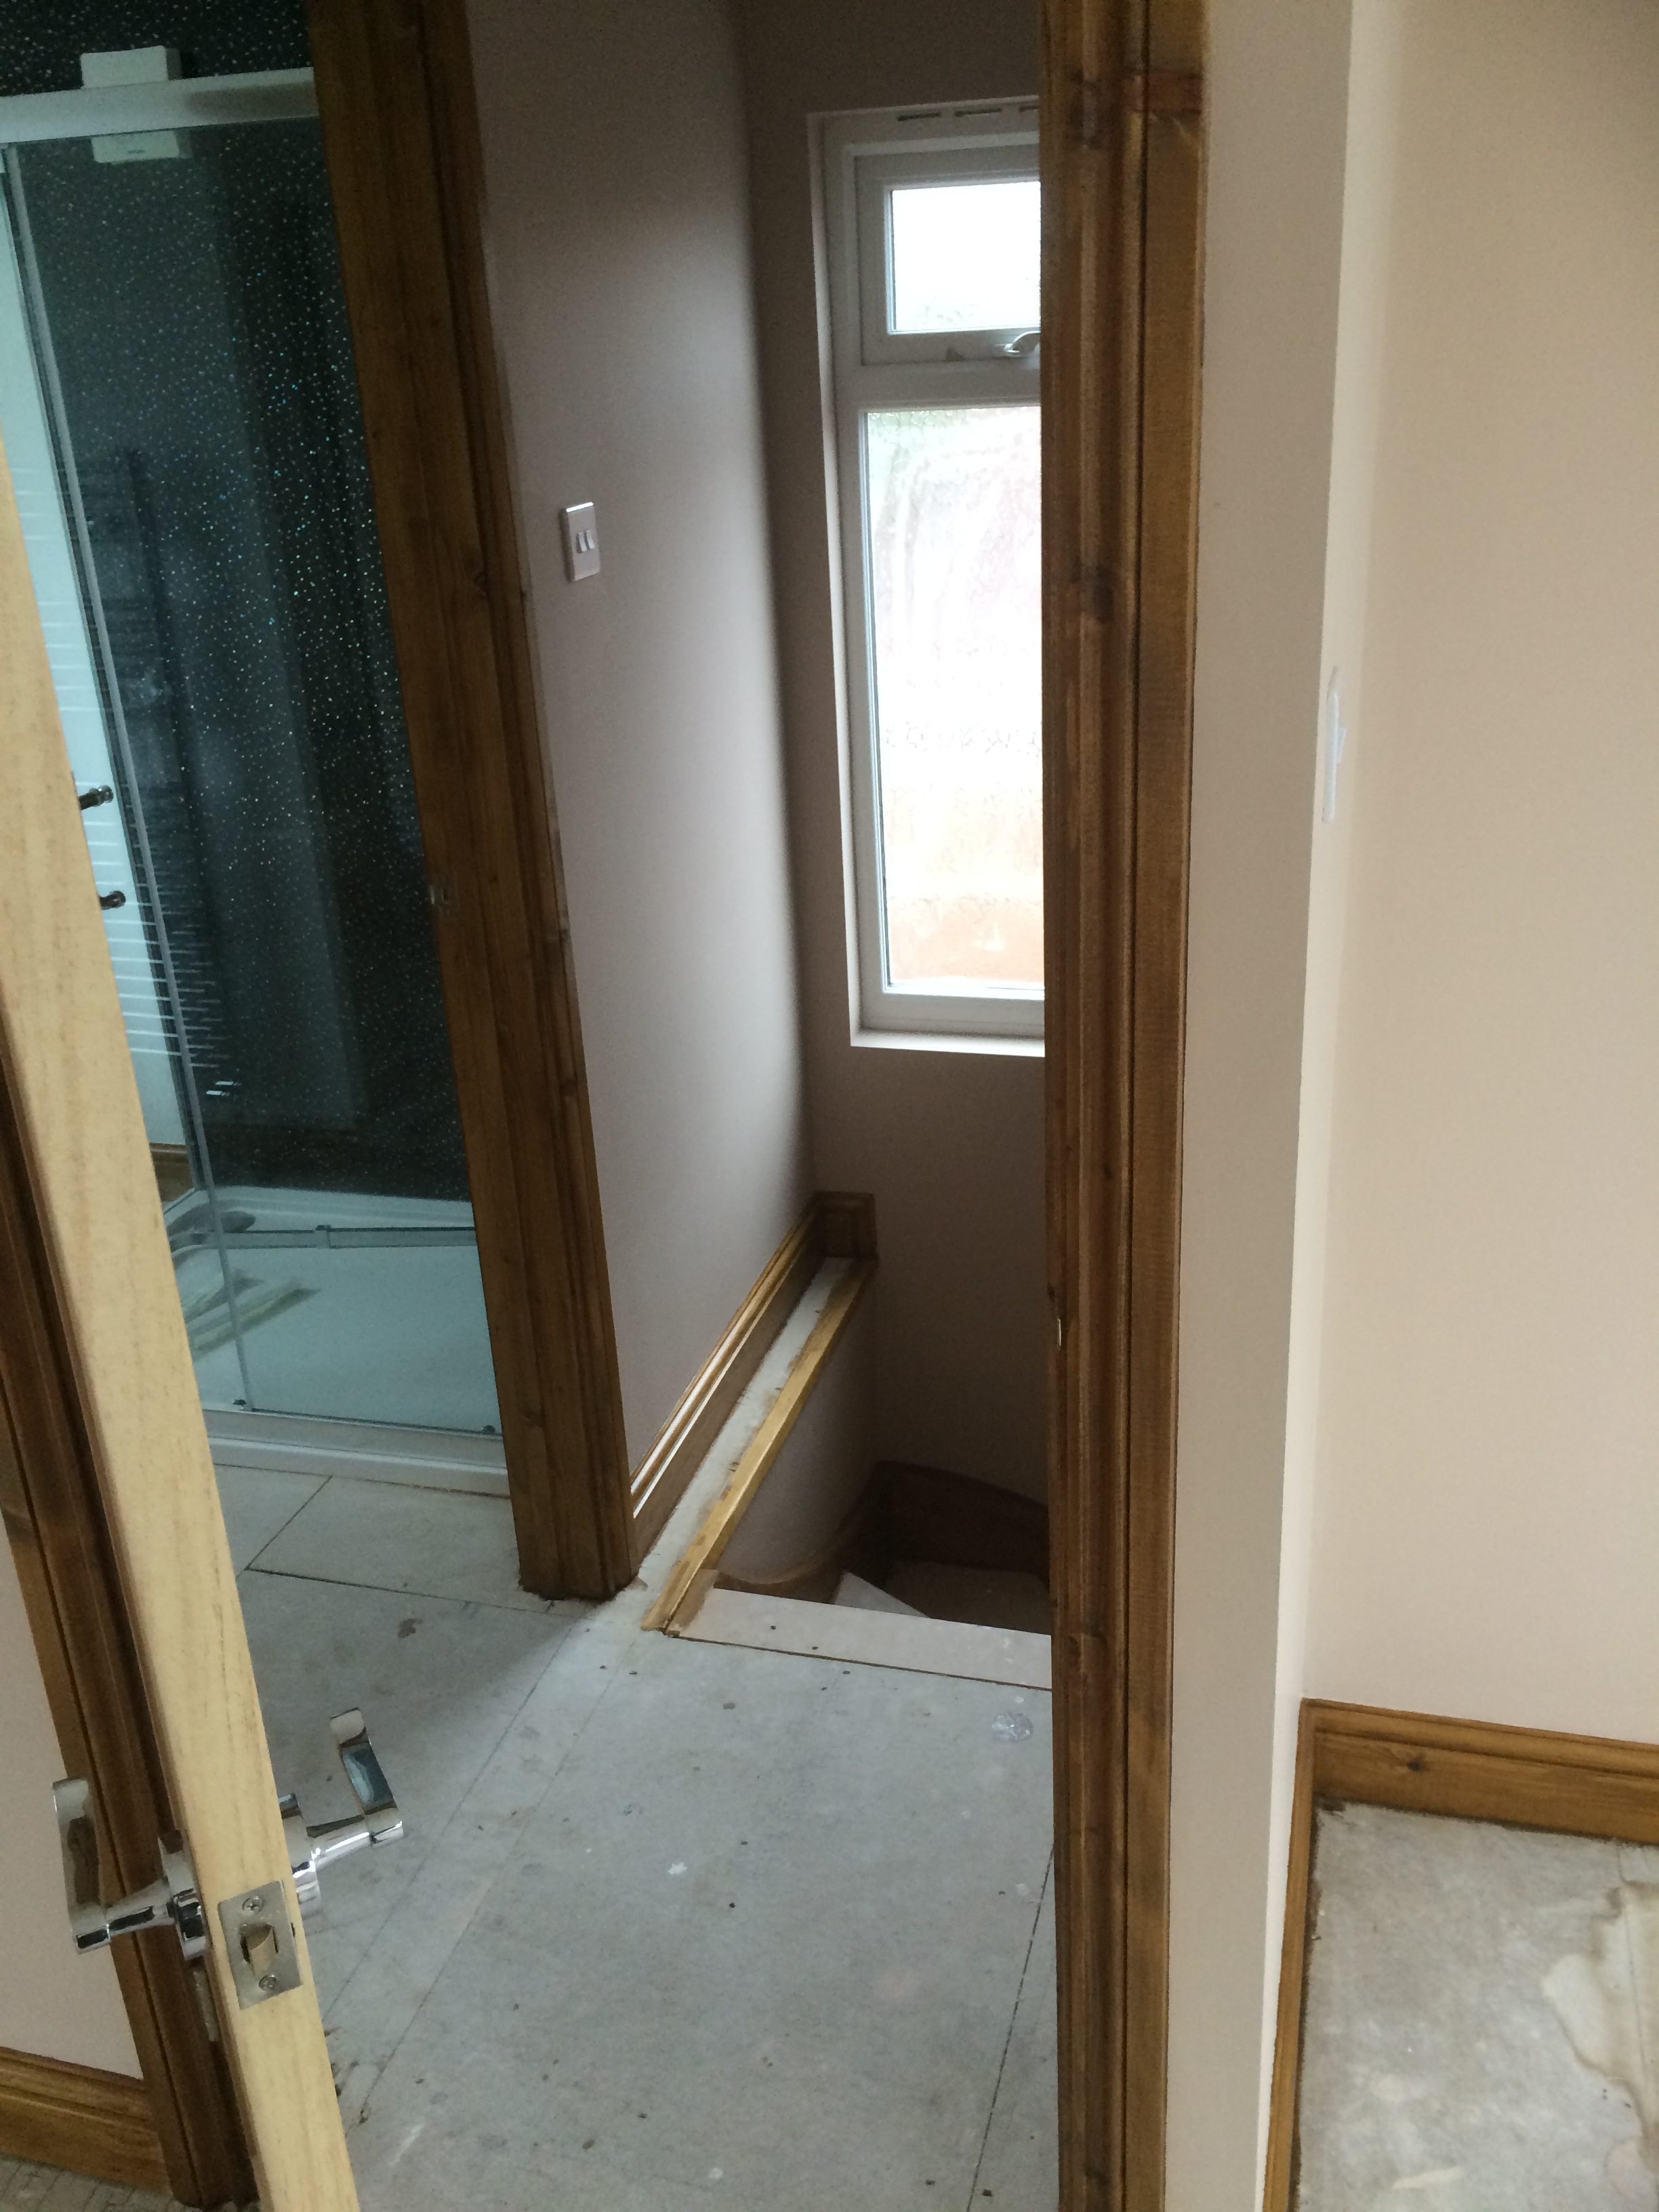 Unfinished bathroom in loft conversion